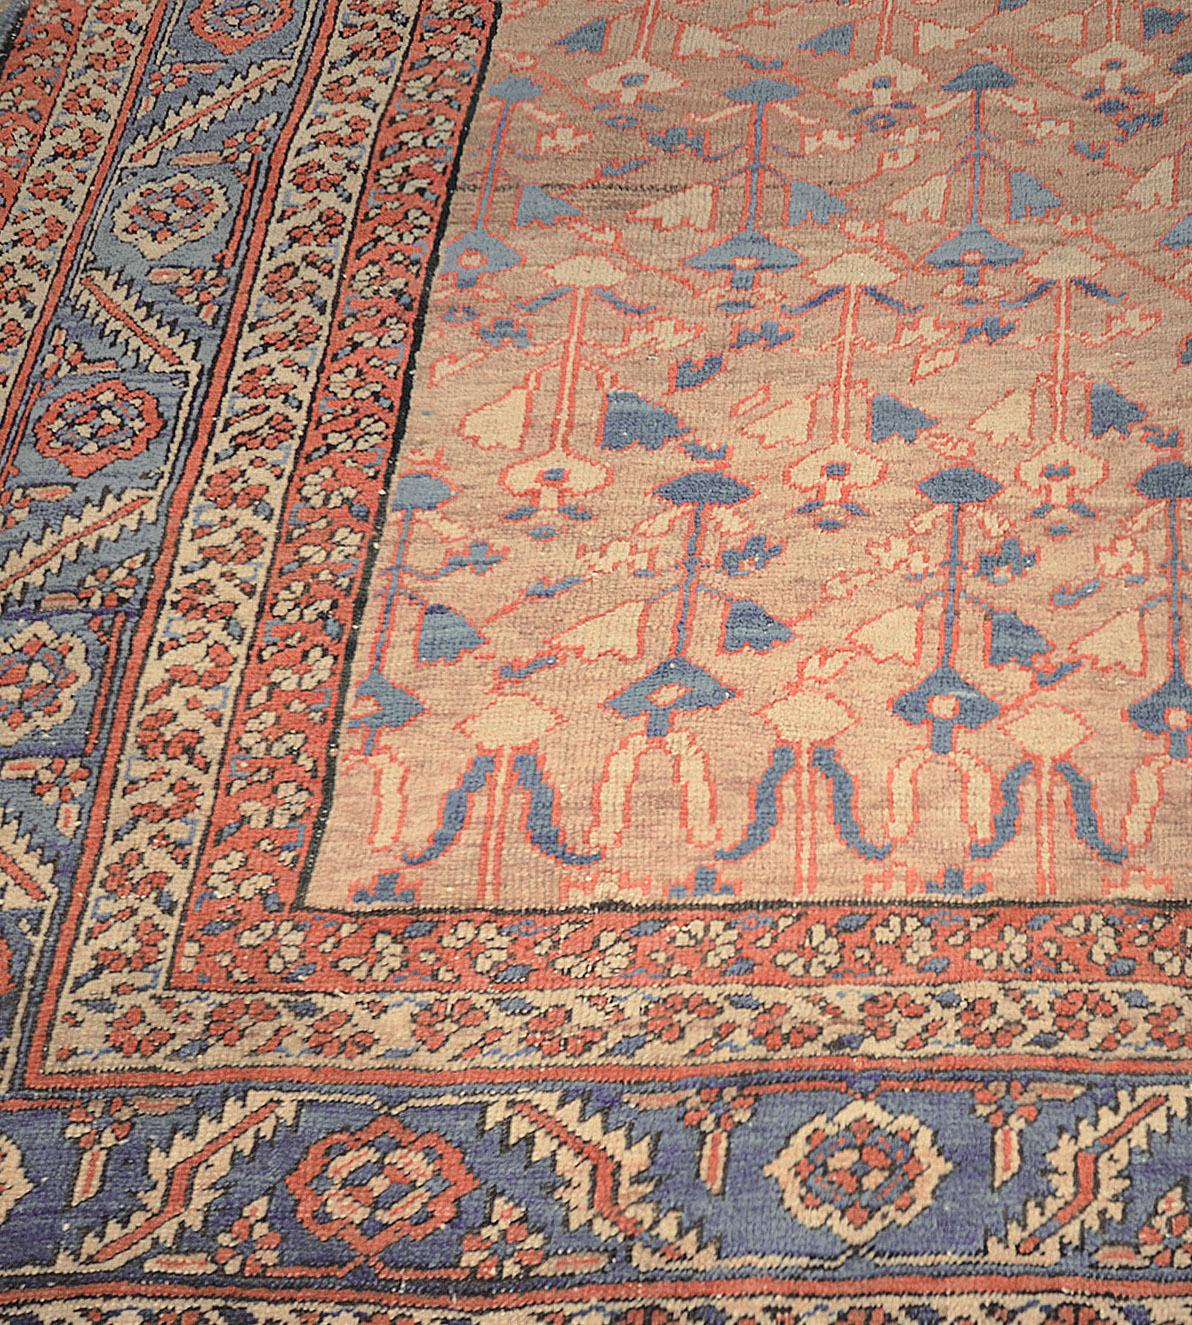 Persian Late 19th Century Hand-Woven Wool Bakhshaish Rug from North West Persia For Sale